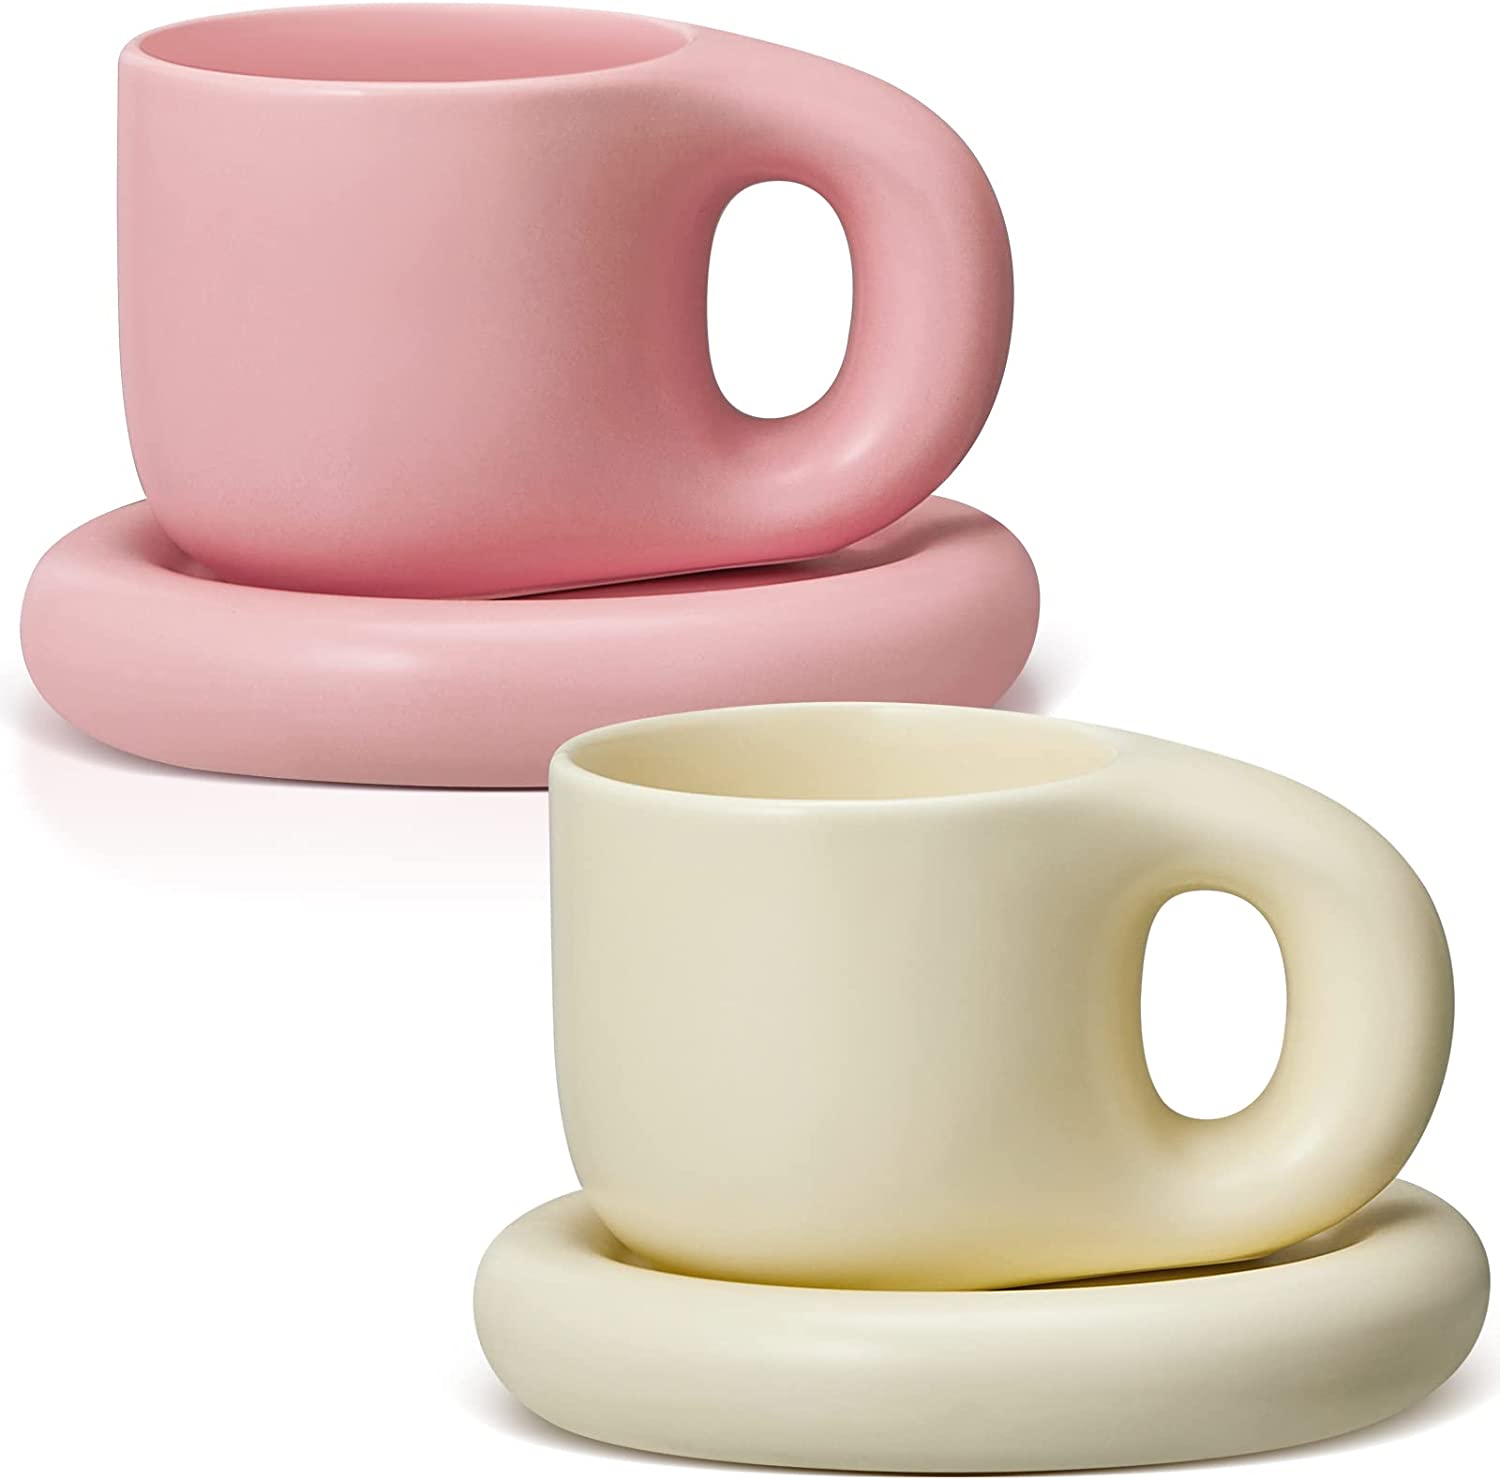 Creative Cute Ceramic Coffee Cup and Saucer Set, Gift Pink